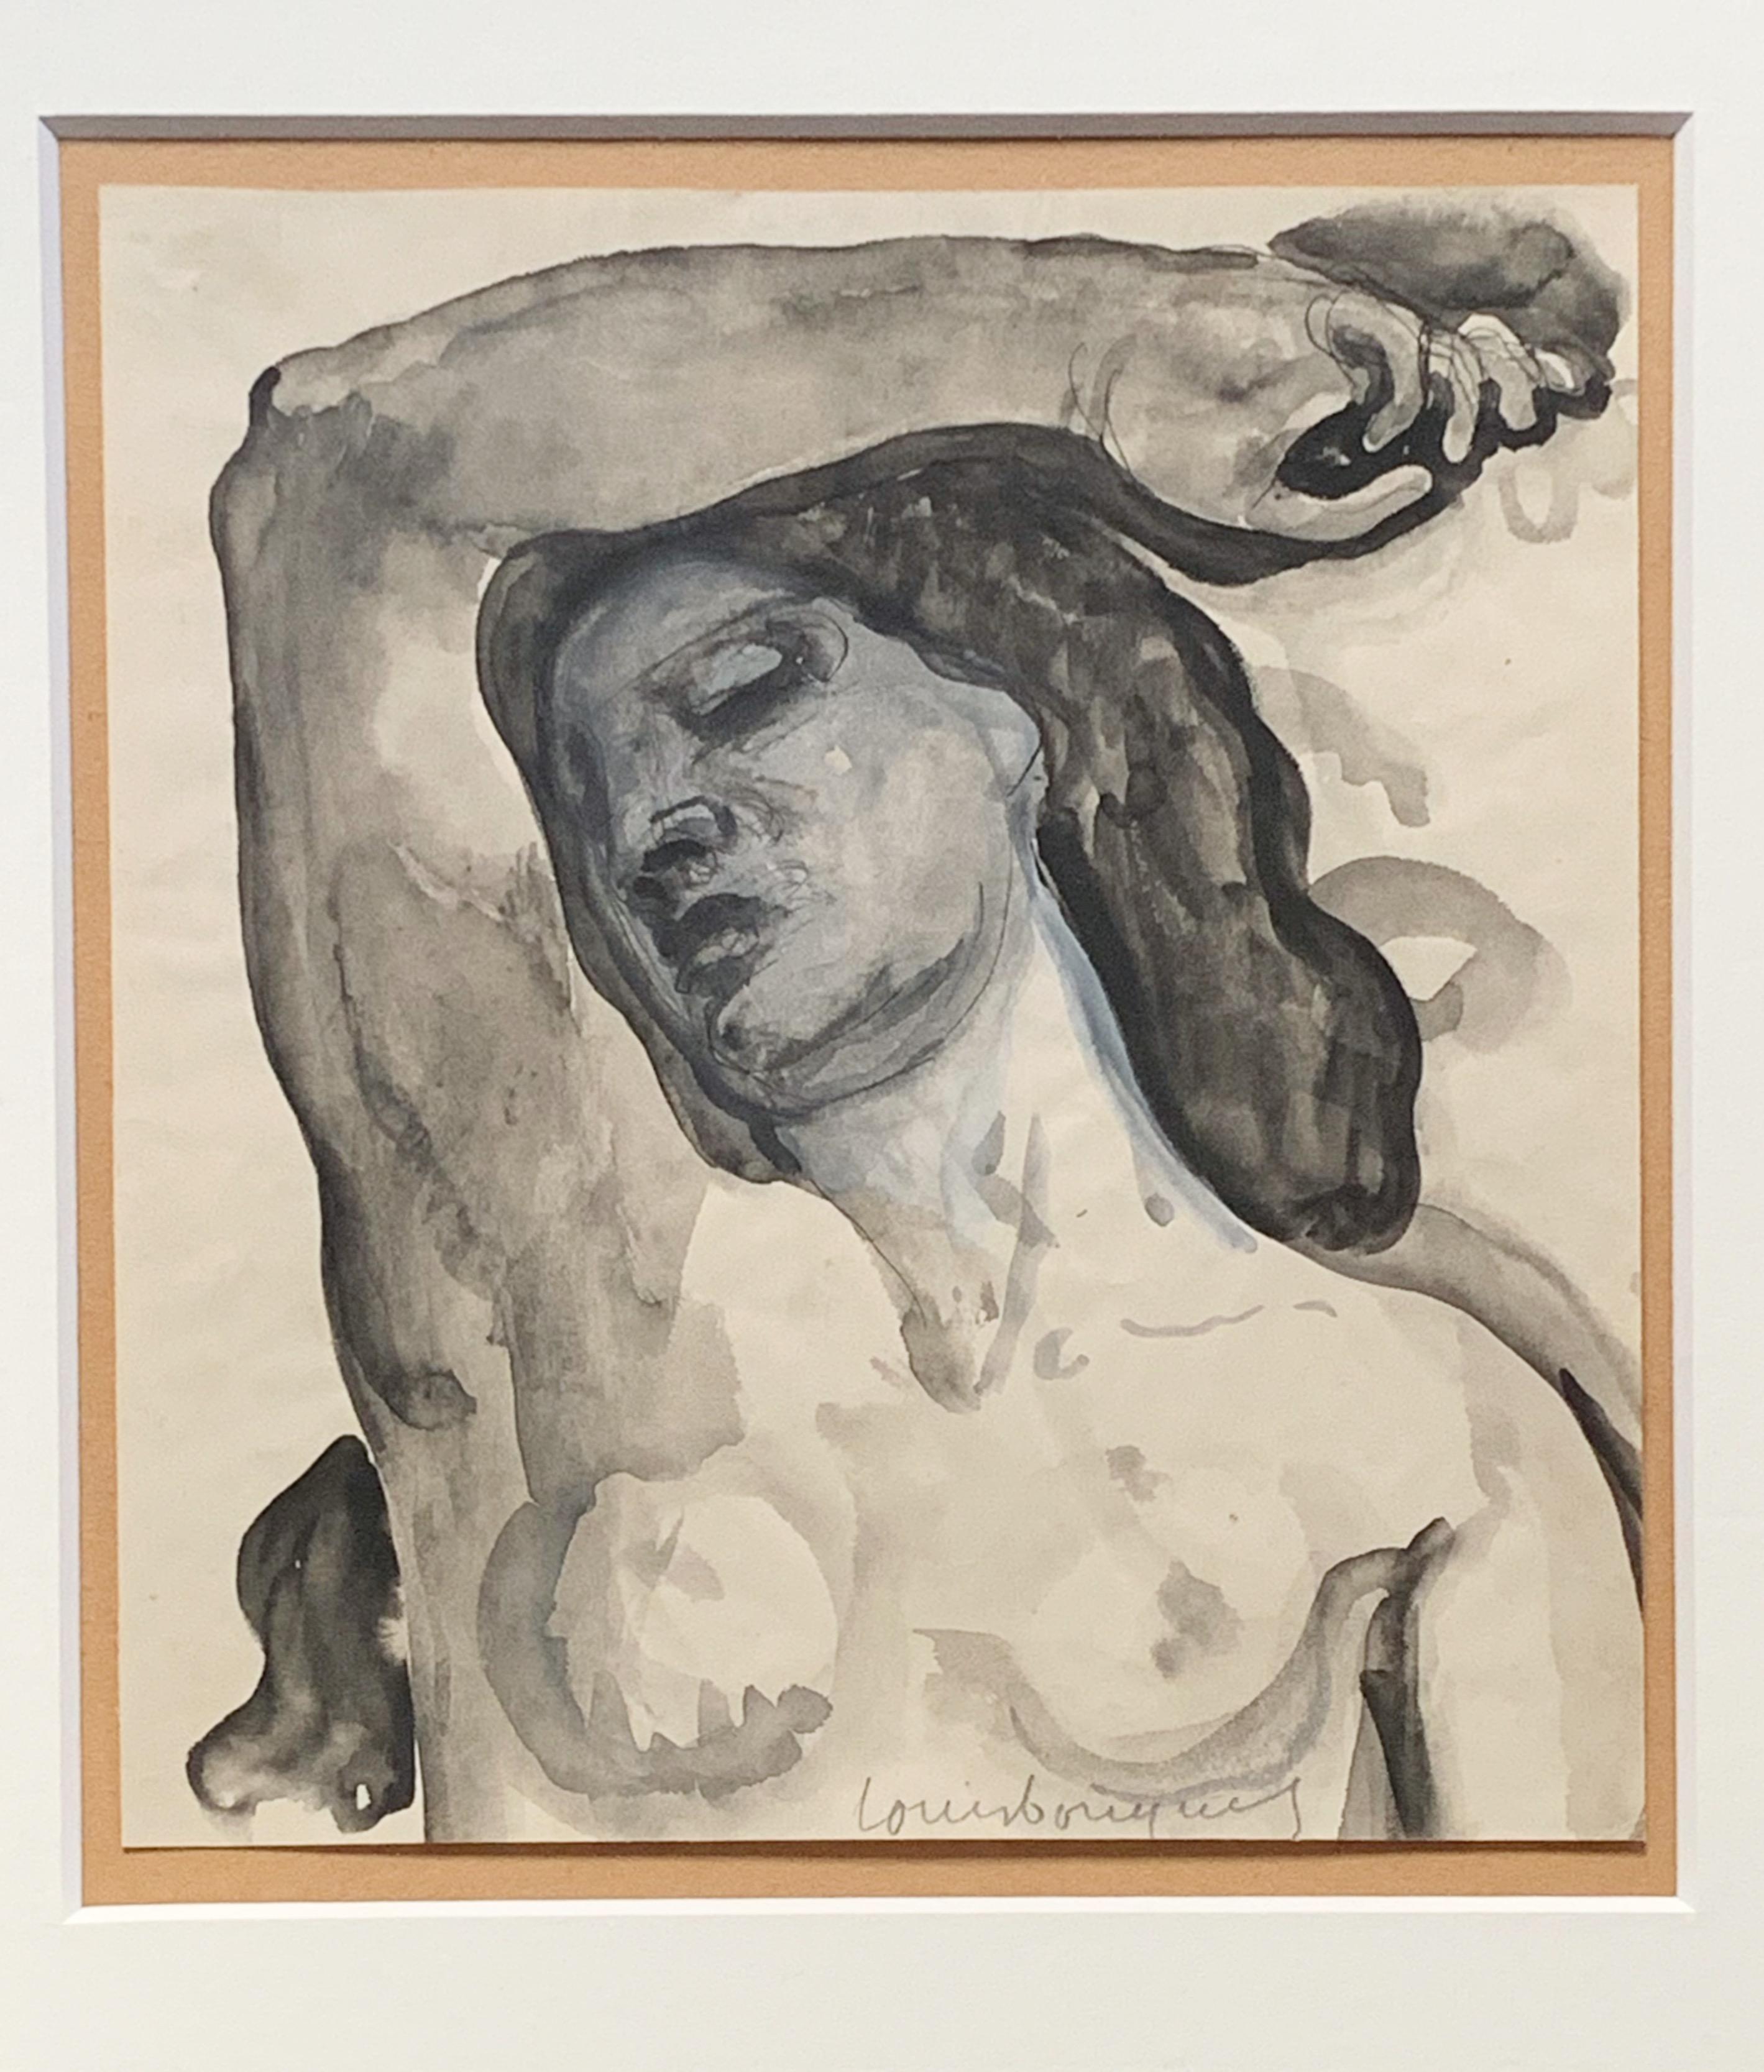 Louis BOUQUET (1885-1952)
Bust of a nude woman with her arm raised
Pen and Indian ink, grey and blue wash on paper
Signed lower centre
Size of work : 16 x 14,5 cm
Antique frame : 35 x 44 cm

Born in Lyon in 1885, Louis Bouquet trained at the École